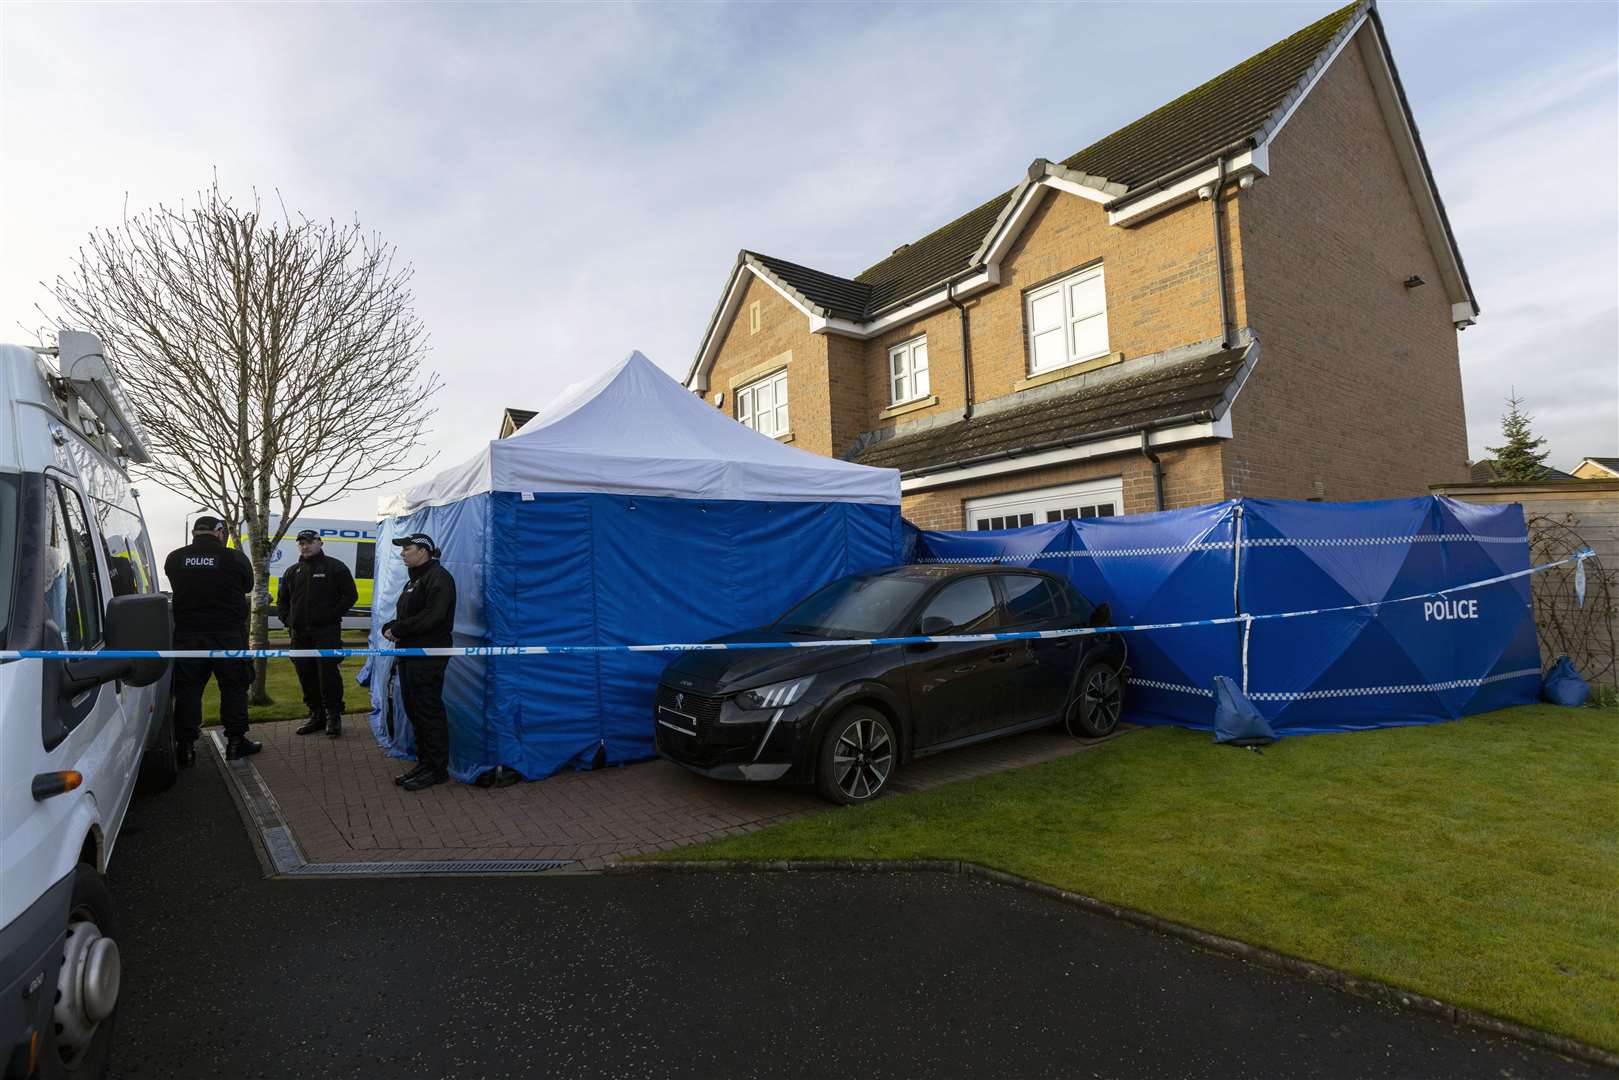 Police have searched the home shared by Nicola Sturgeon and Peter Murrell as part of an investigation into SNP finances (Robert Perry/PA)